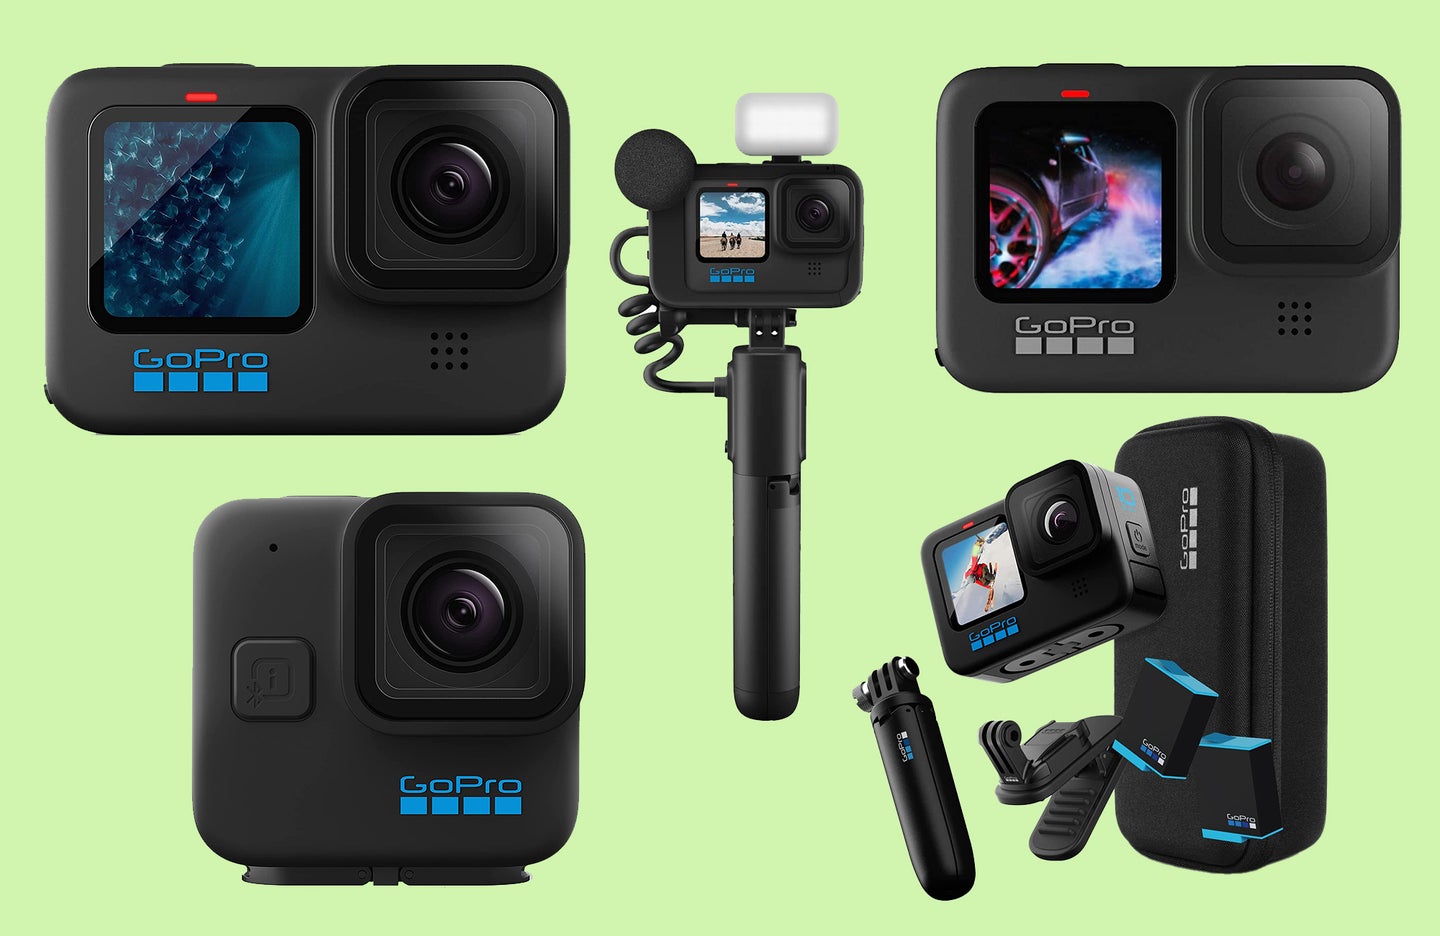 GoPro cameras and accessory bundles against a green background